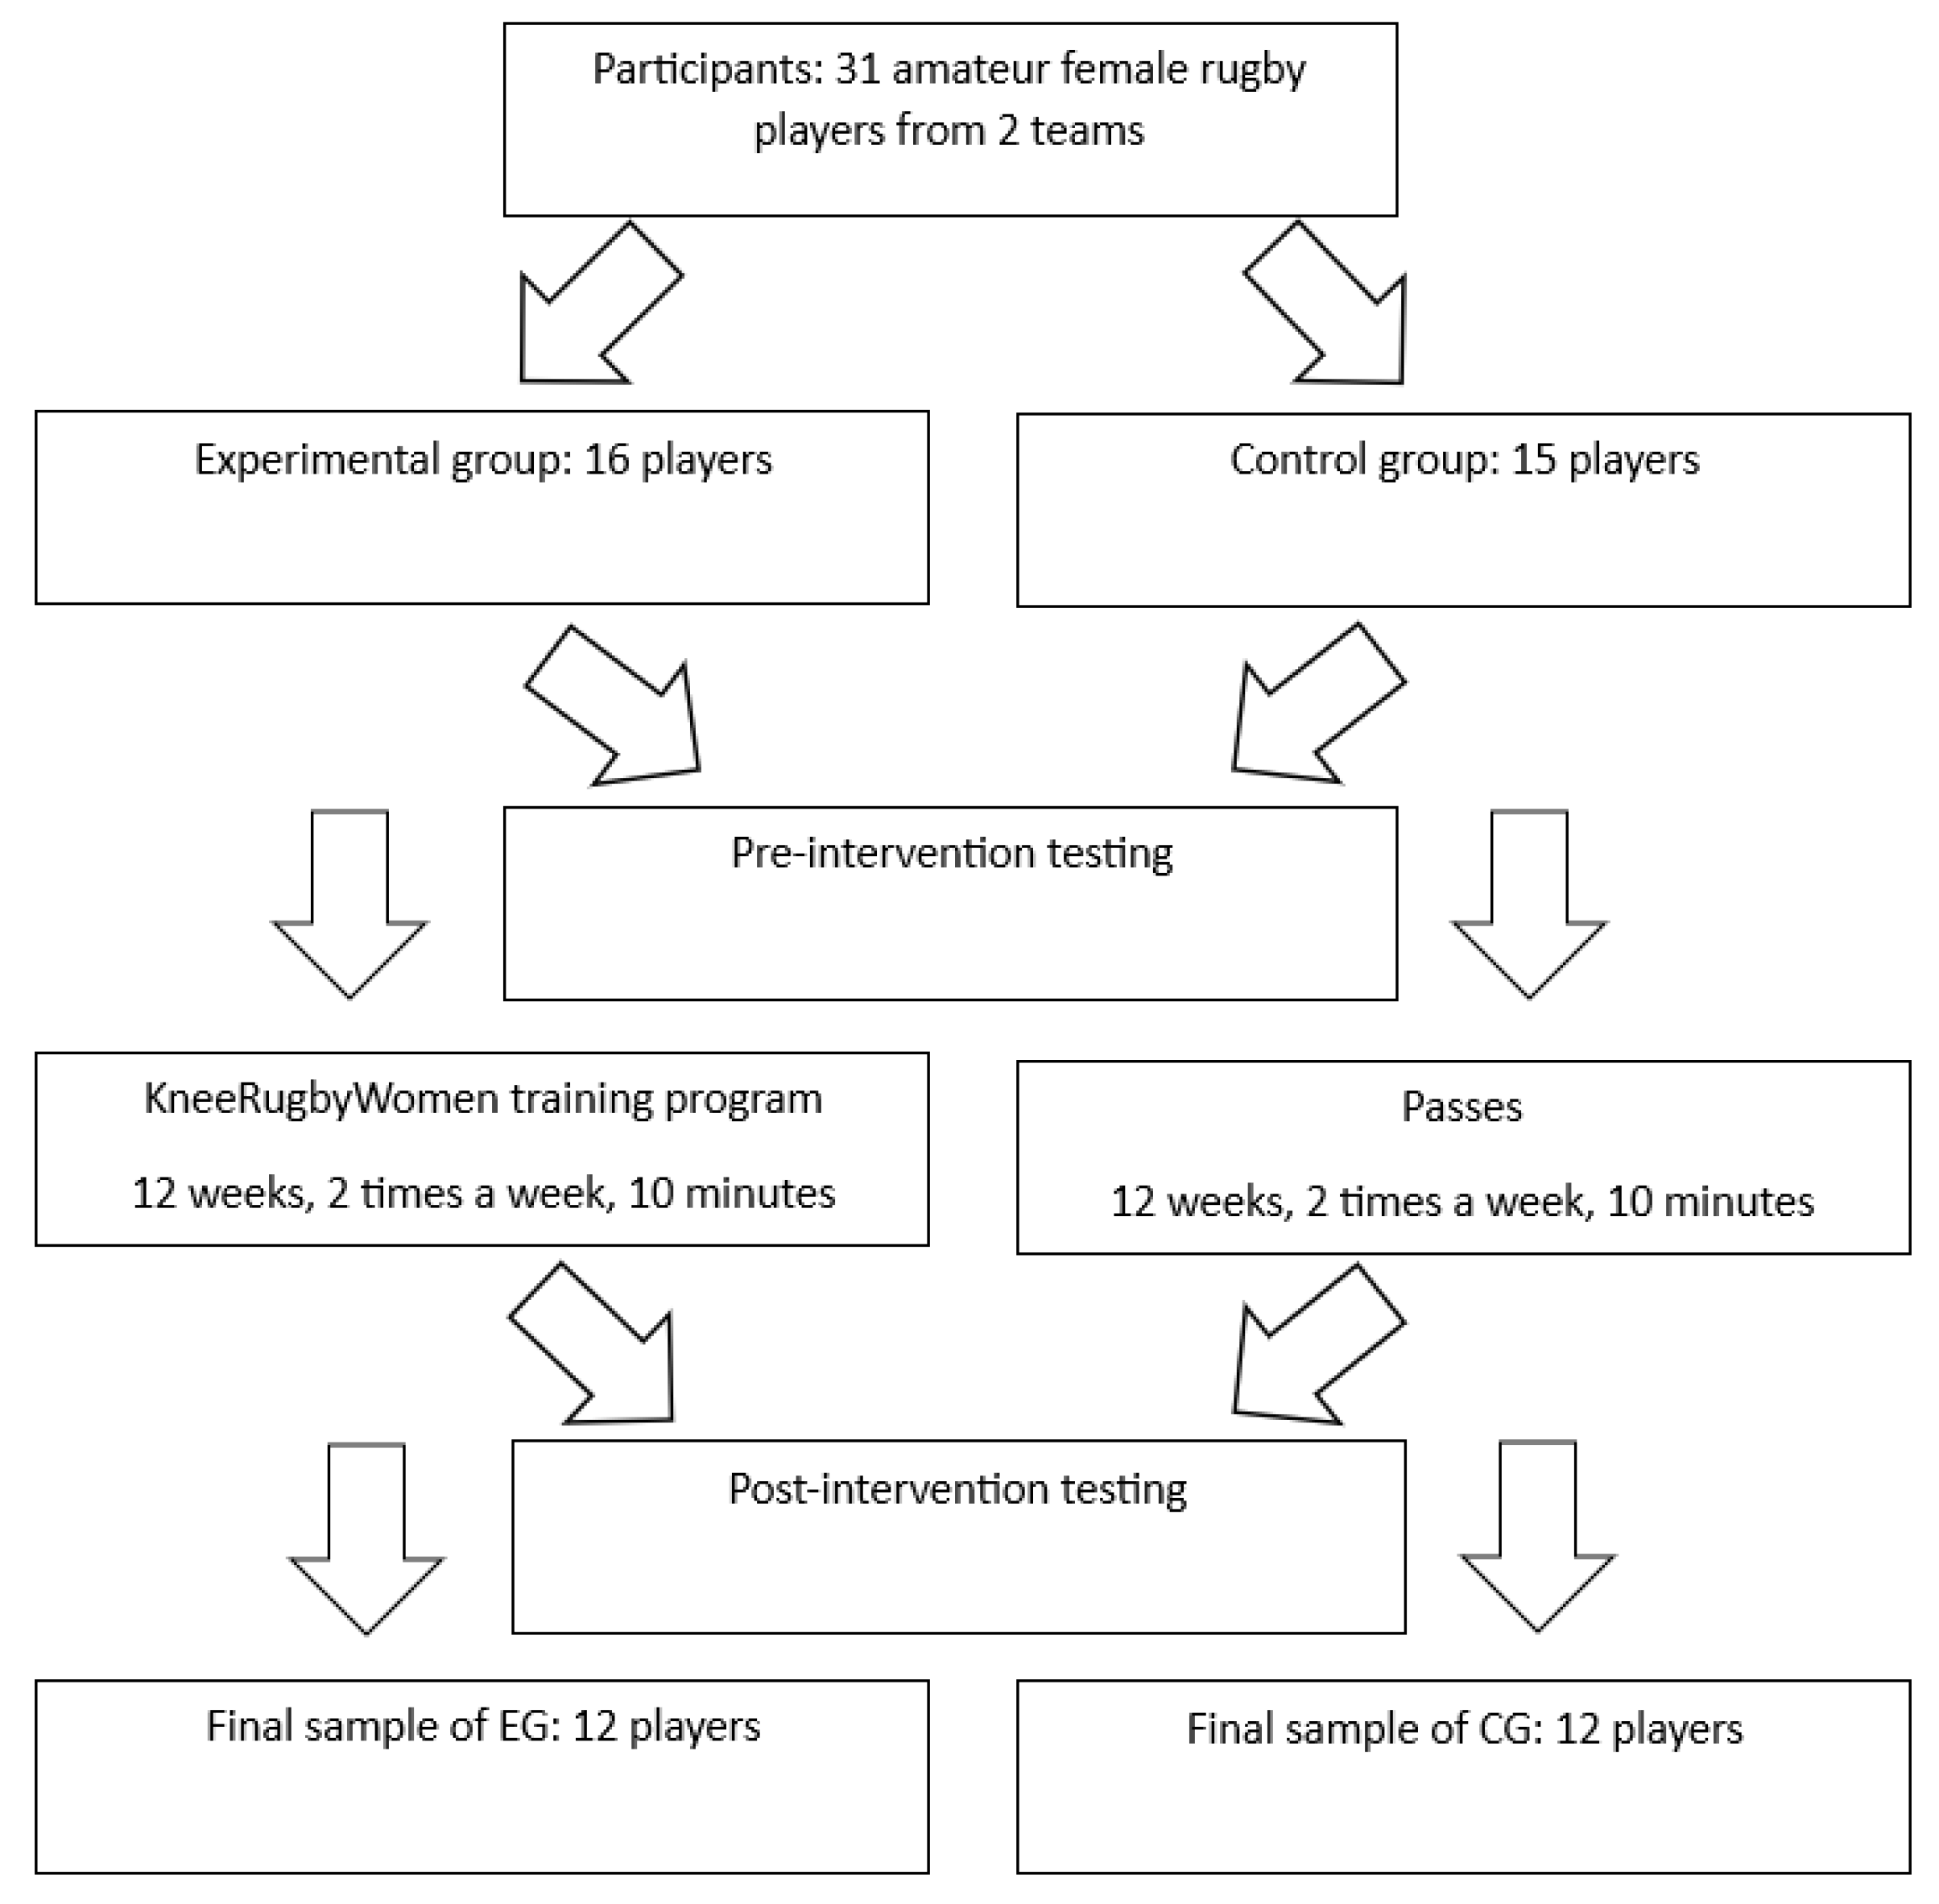 Applied Sciences Free Full-Text The Impact of a Novel Neuromuscular Training Program on Leg Stiffness, Reactive Strength, and Landing Biomechanics in Amateur Female Rugby Players